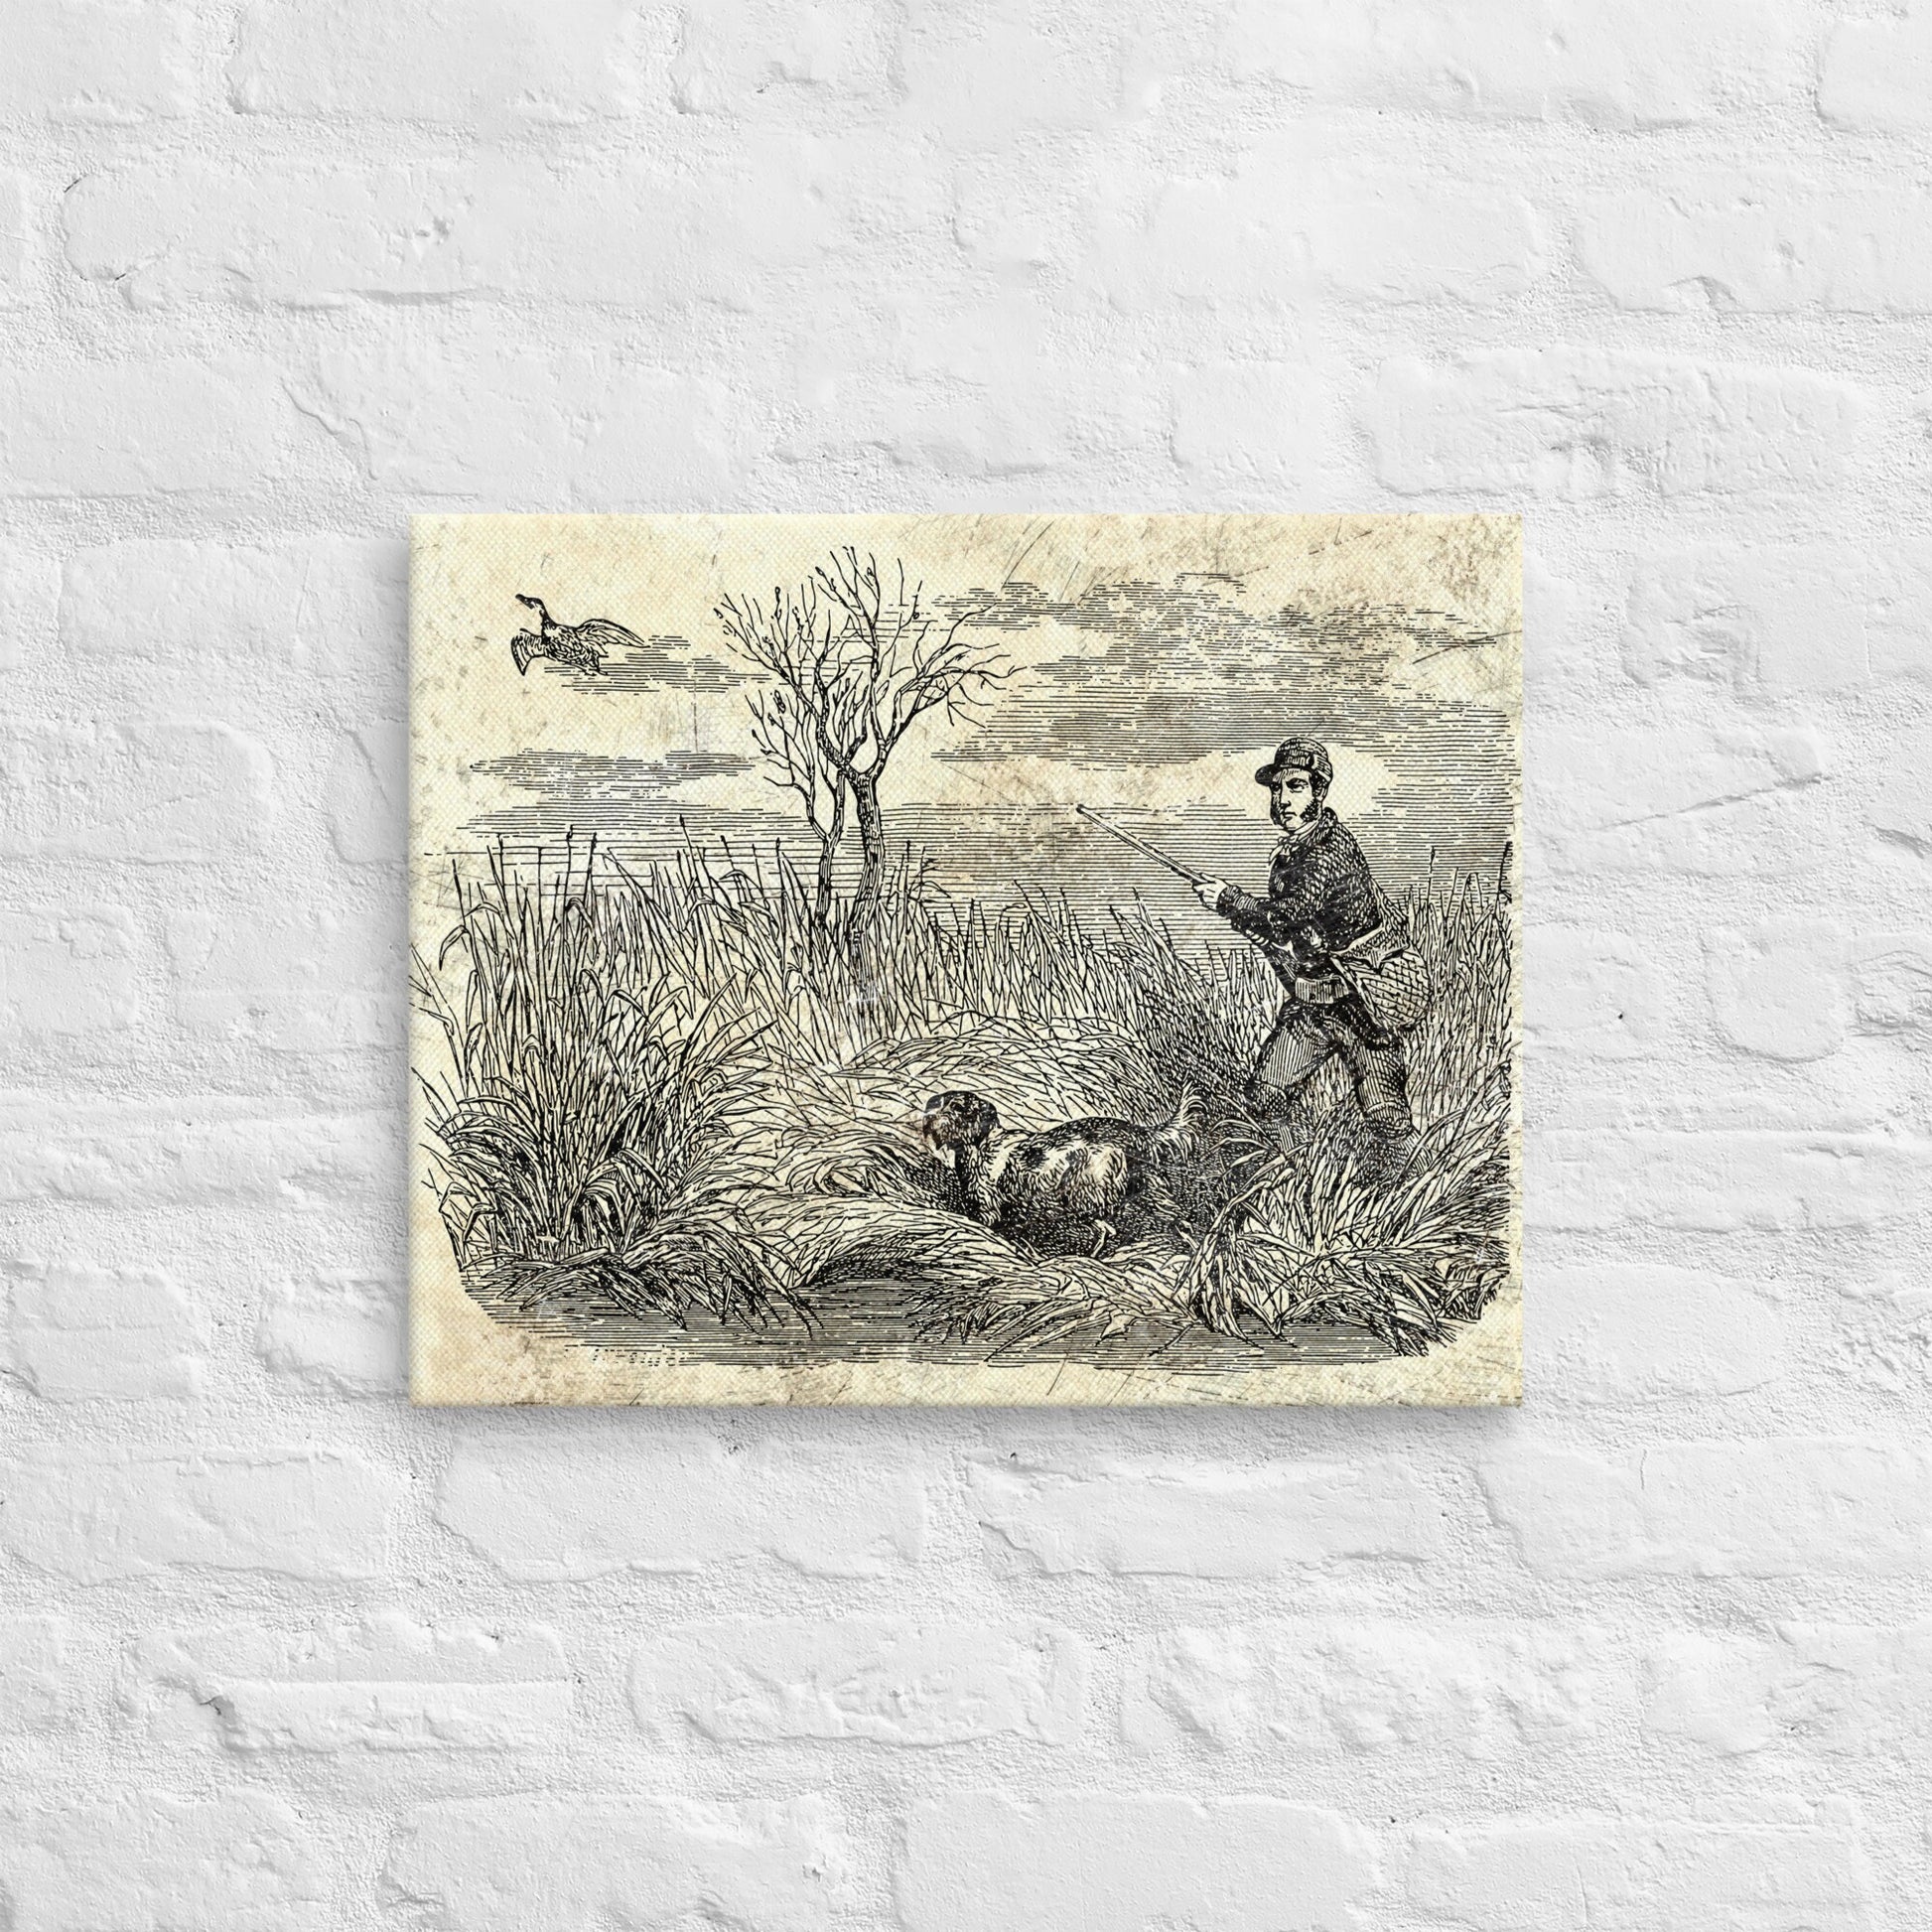 Duck Hunting Waterfowl Vintage Etched Style Distressed Art Wall Stretched Canvas Retro Hunting Dog Wall Decor for Hunters